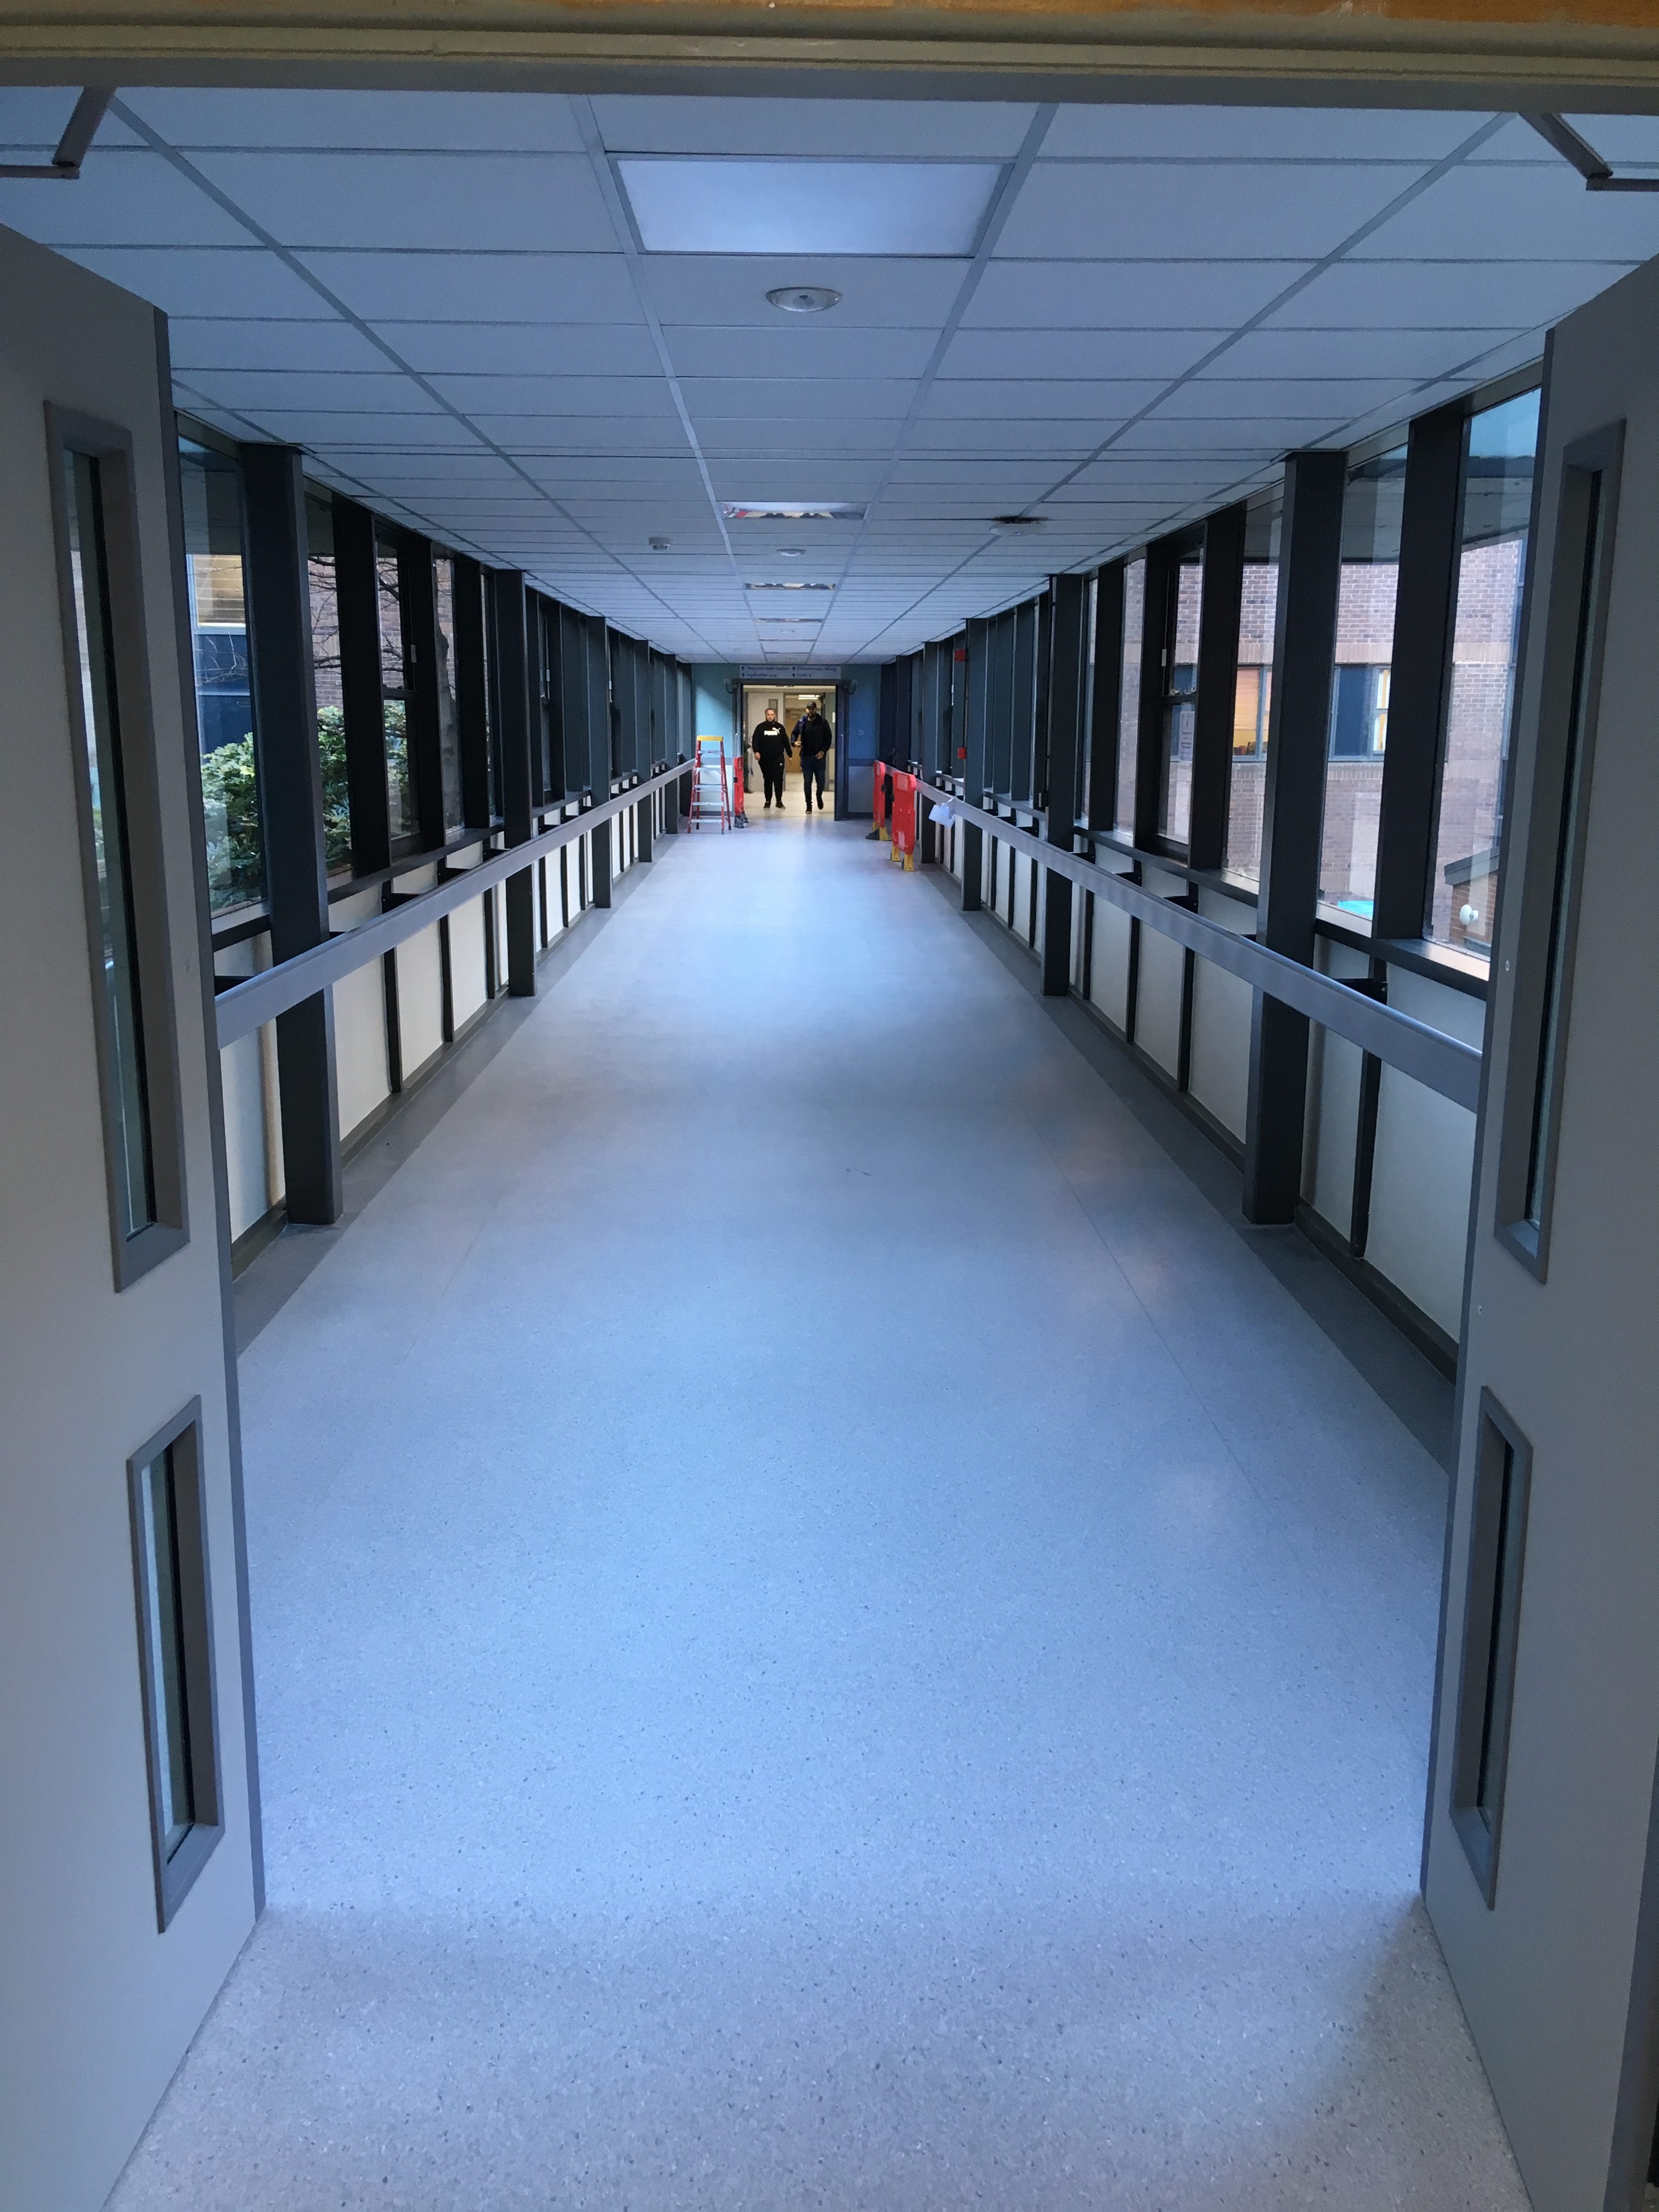 After: The corridor entrance and corridor as work is completed - a total transformation!